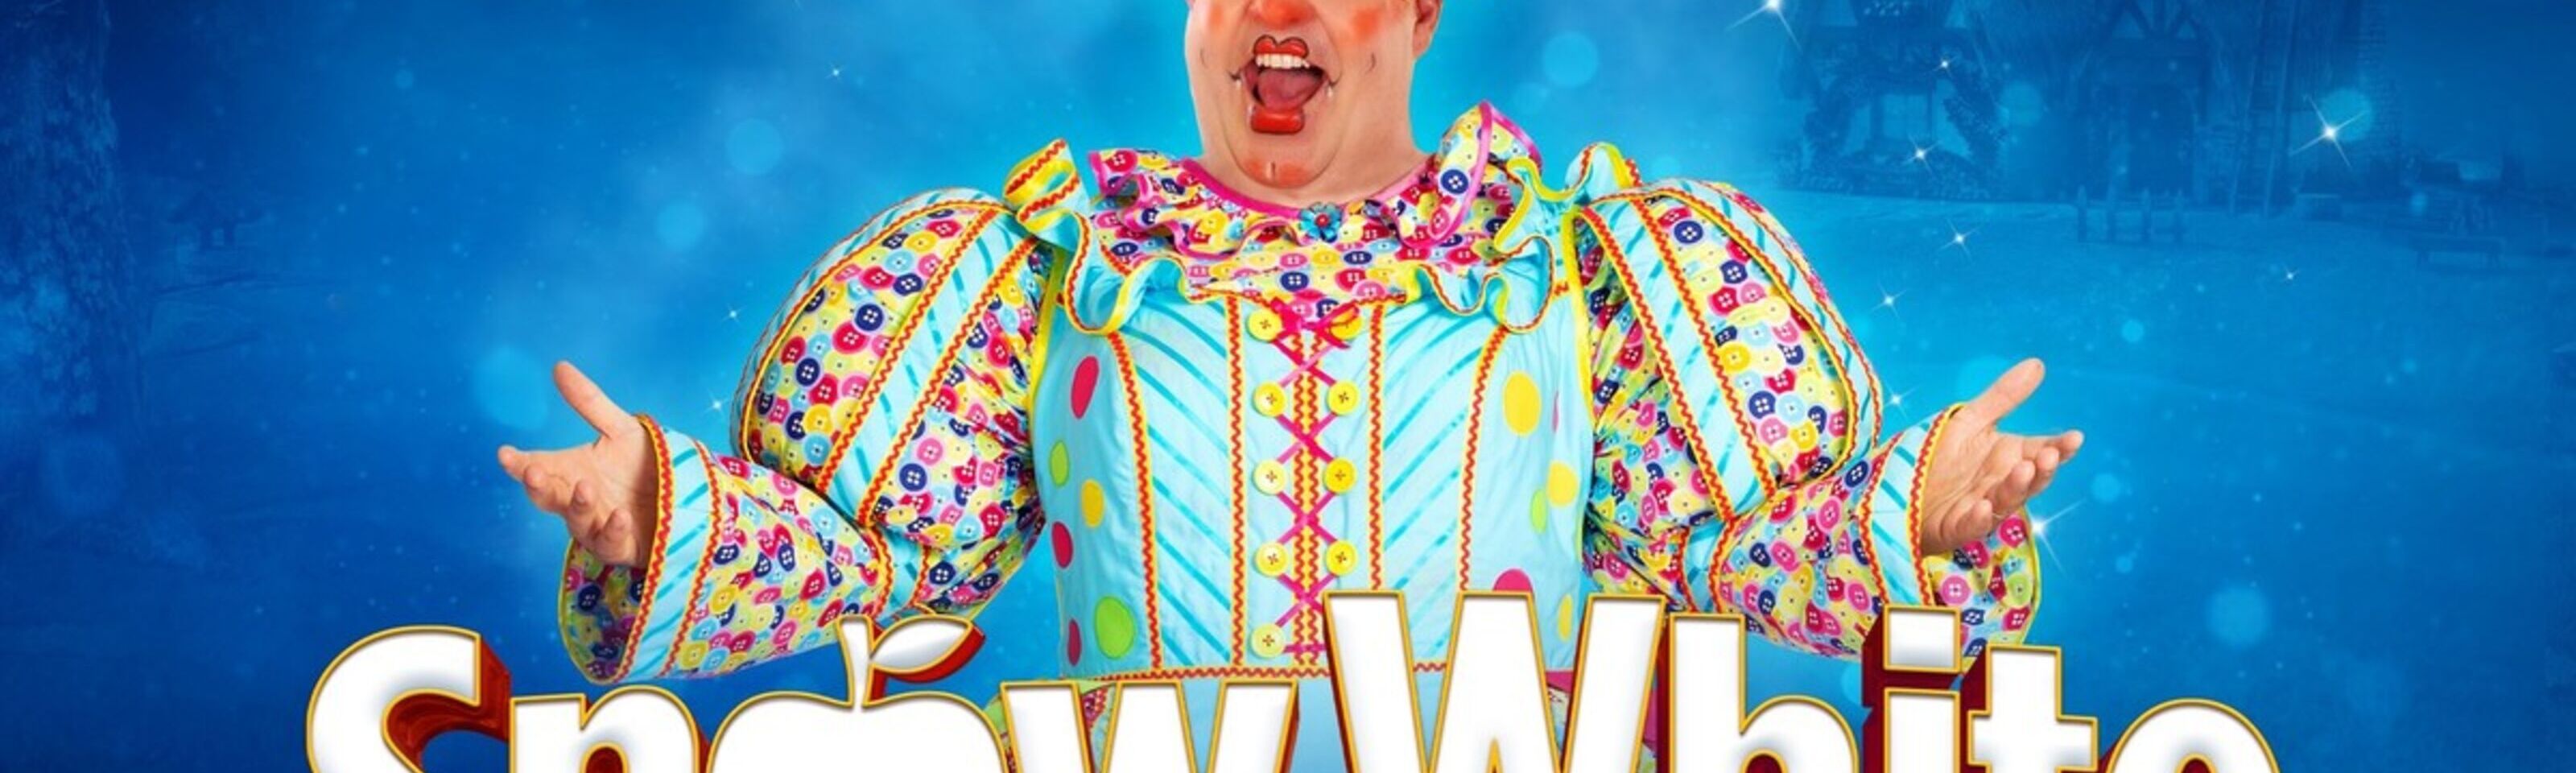 Snow White Pantomime - Lyceum Theatre Sheffield